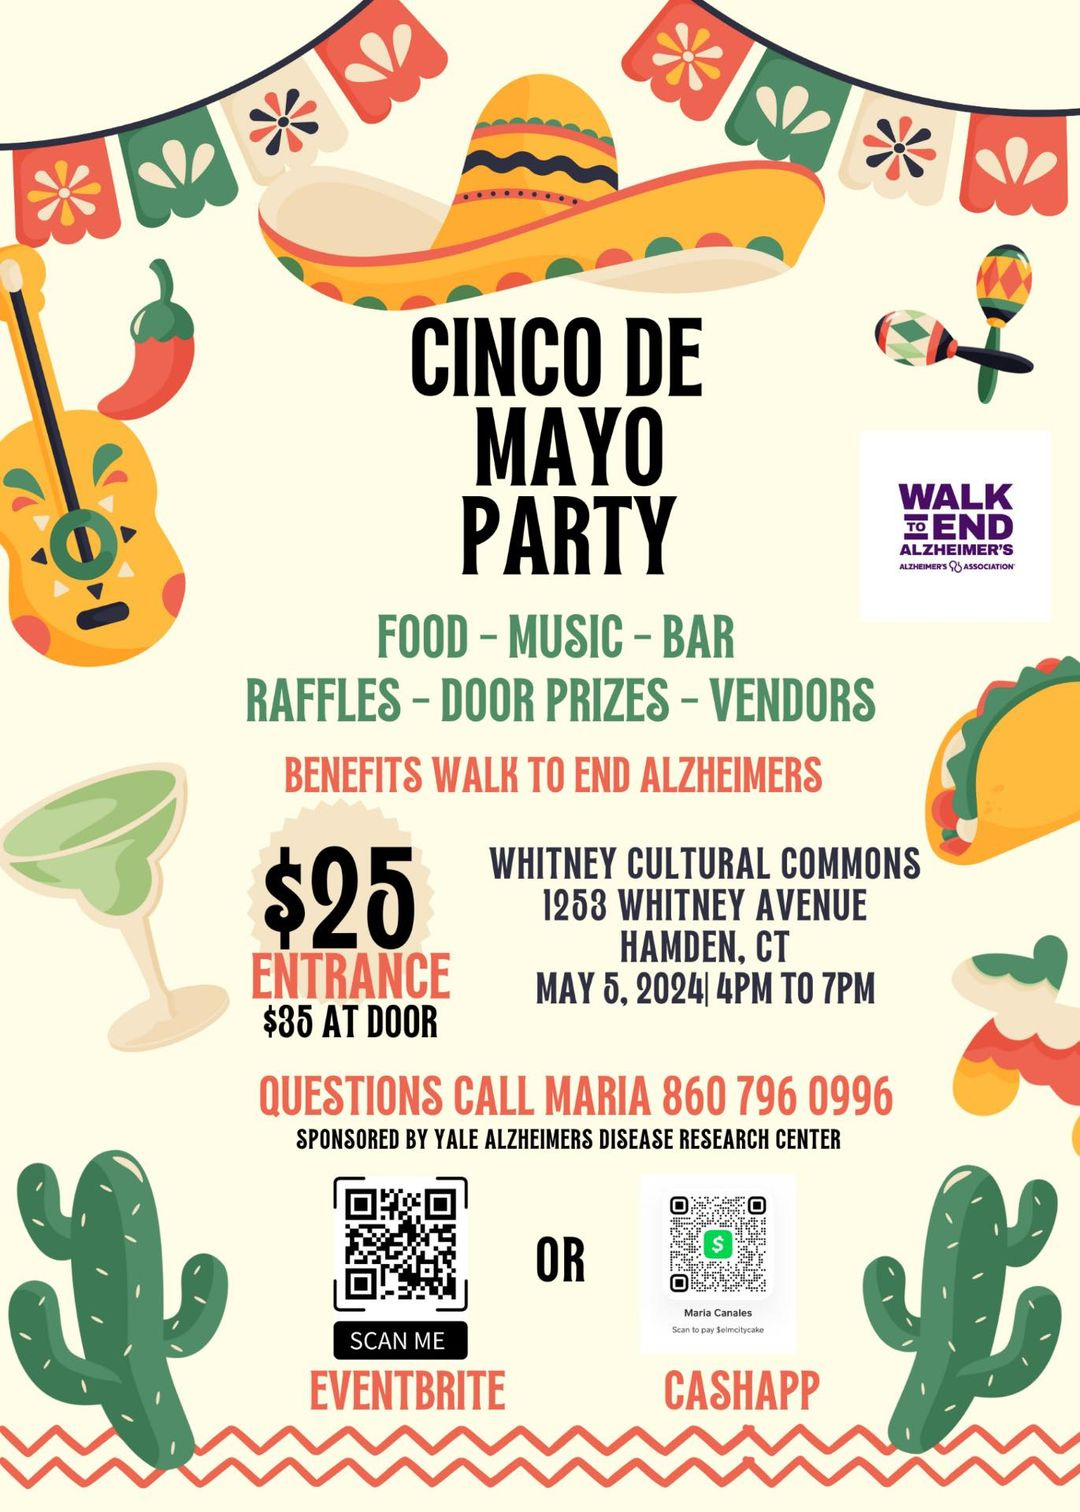 May be an image of drink and text that says 'CSEO OI WALK END TO ALZHEIMER'S ALZHEIMER'S KLTHTATIS អពាទបី្អនាពពាយ BMBapuTou CINCO DE MAYO PARTY FOOD-MUSIC-BAR BAR FOOD -MUSIC- RAFFLES- DOOR PRIZES -VENDORS BENEFITS WALK TO END ALZHEIMERS $25 ENTRANCE $35 AT DOOR WHITNEY CULTURAL COMMONS 1253 WHITNEY AVENUE HAMDEN, CT MAY 2024| 4PM TO 7PM QUESTIONS CALL MARIA 860 796 0996 SPONSORED BY YALE ALZHEIMERS DISEASE RESEARCH CENTER OR 好g Canvies SCAN ME EVENTBRITE CACHAPP'